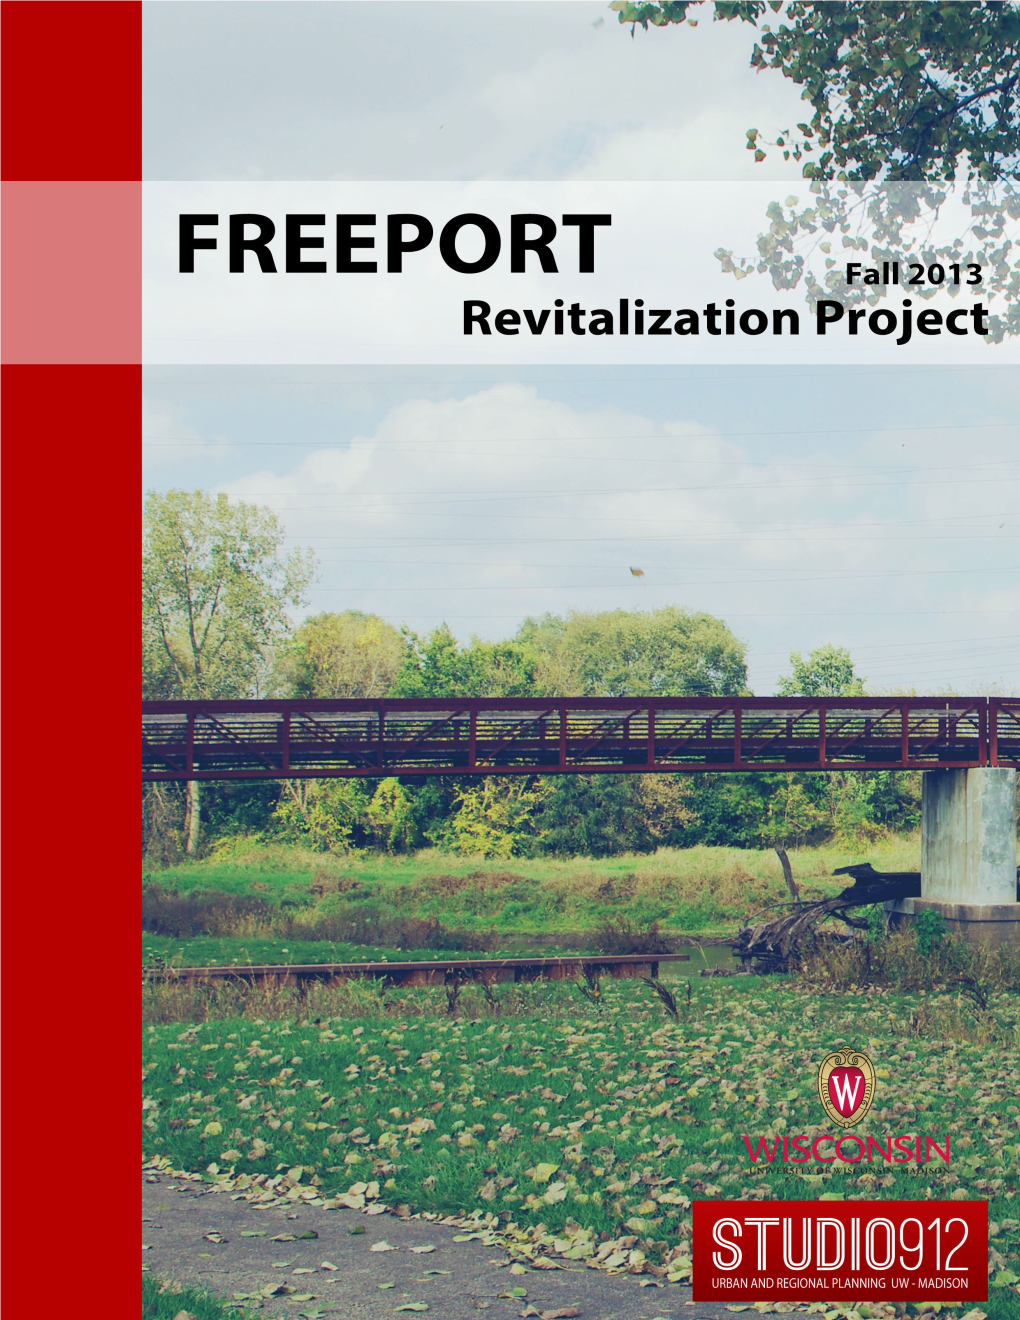 Freeport Revitalization Project Has Given URPL Ect Development, and Was Taken Very Seriously by All Teams